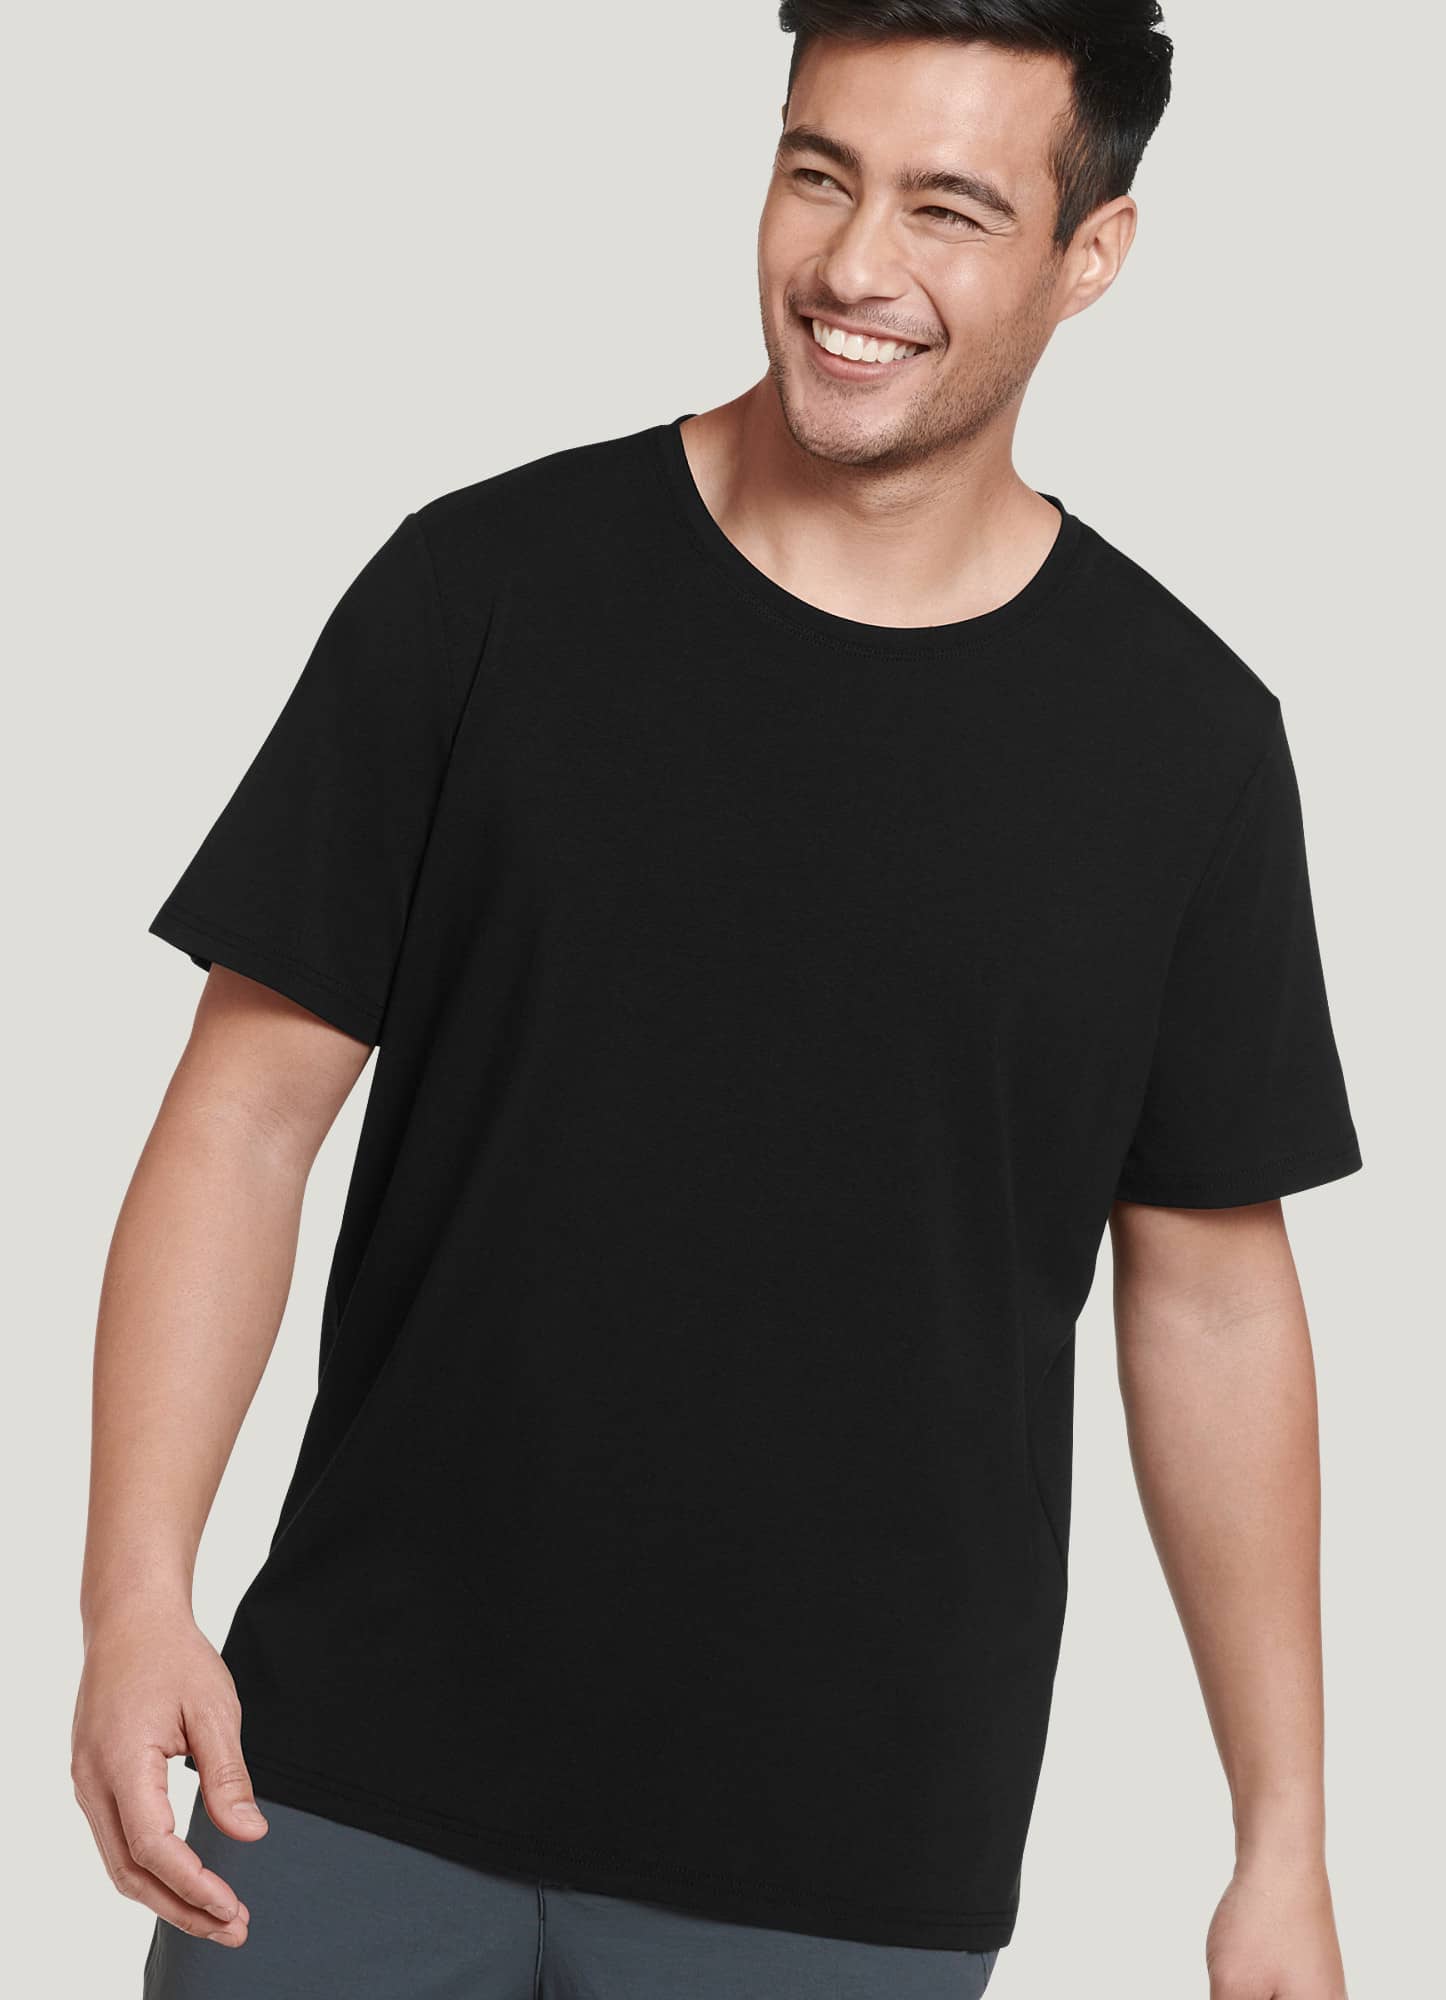 Hold Tight ribbed modal-blend jersey t-shirt